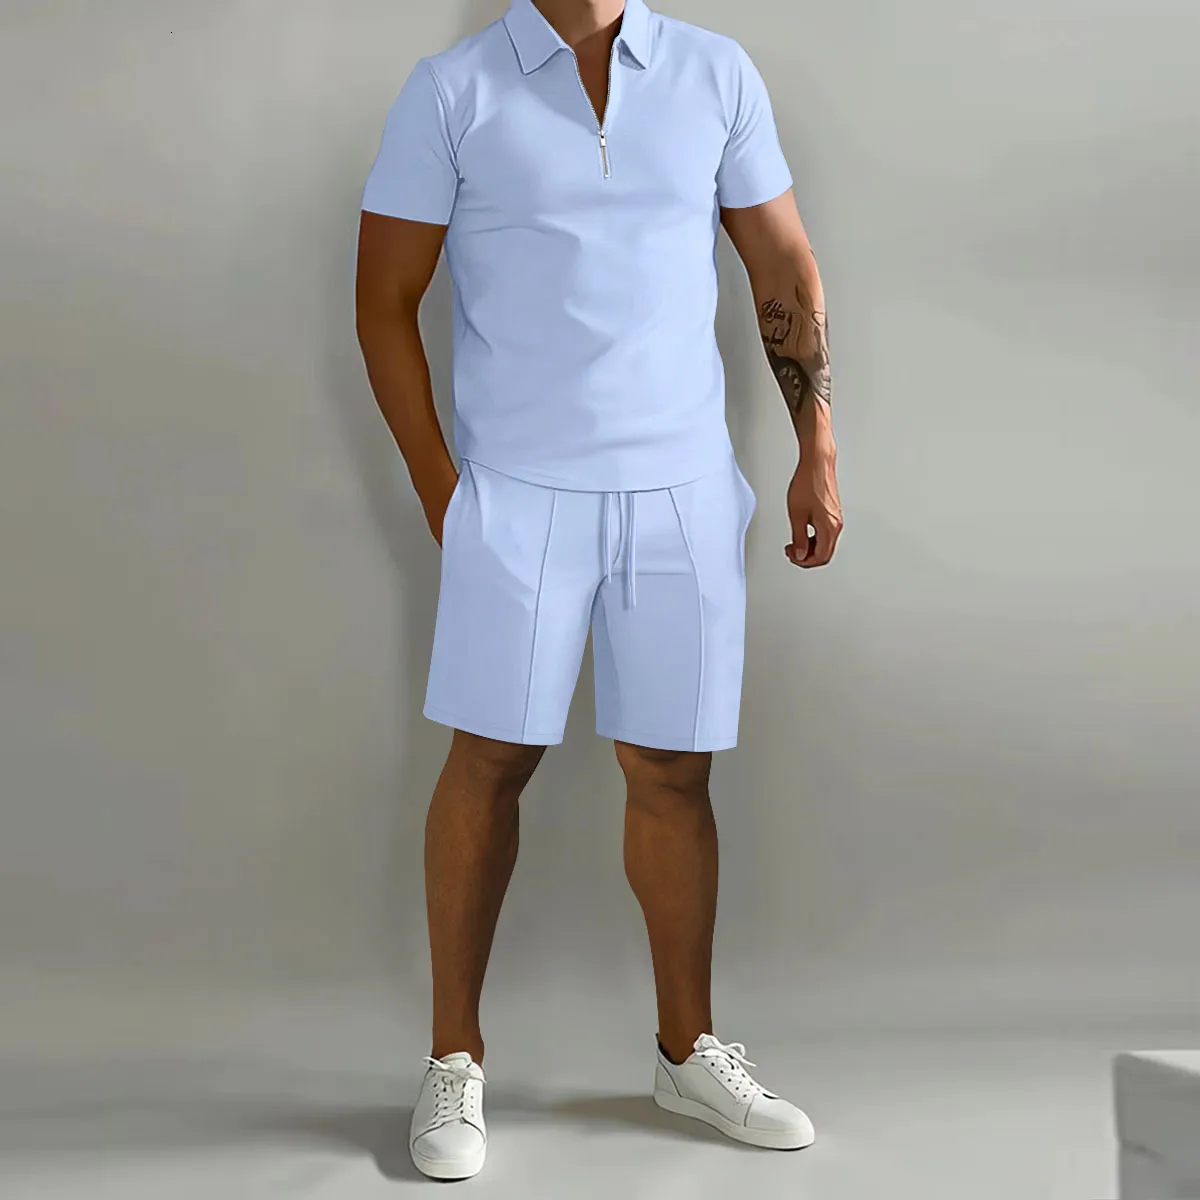 Men S Tracksuits Summer Short Sleeve Thin Polo Shirt Sport Shorts 2 Piece Mens Tracksuit Suit Men Solid Set Casual Jogging Sportswear 230522